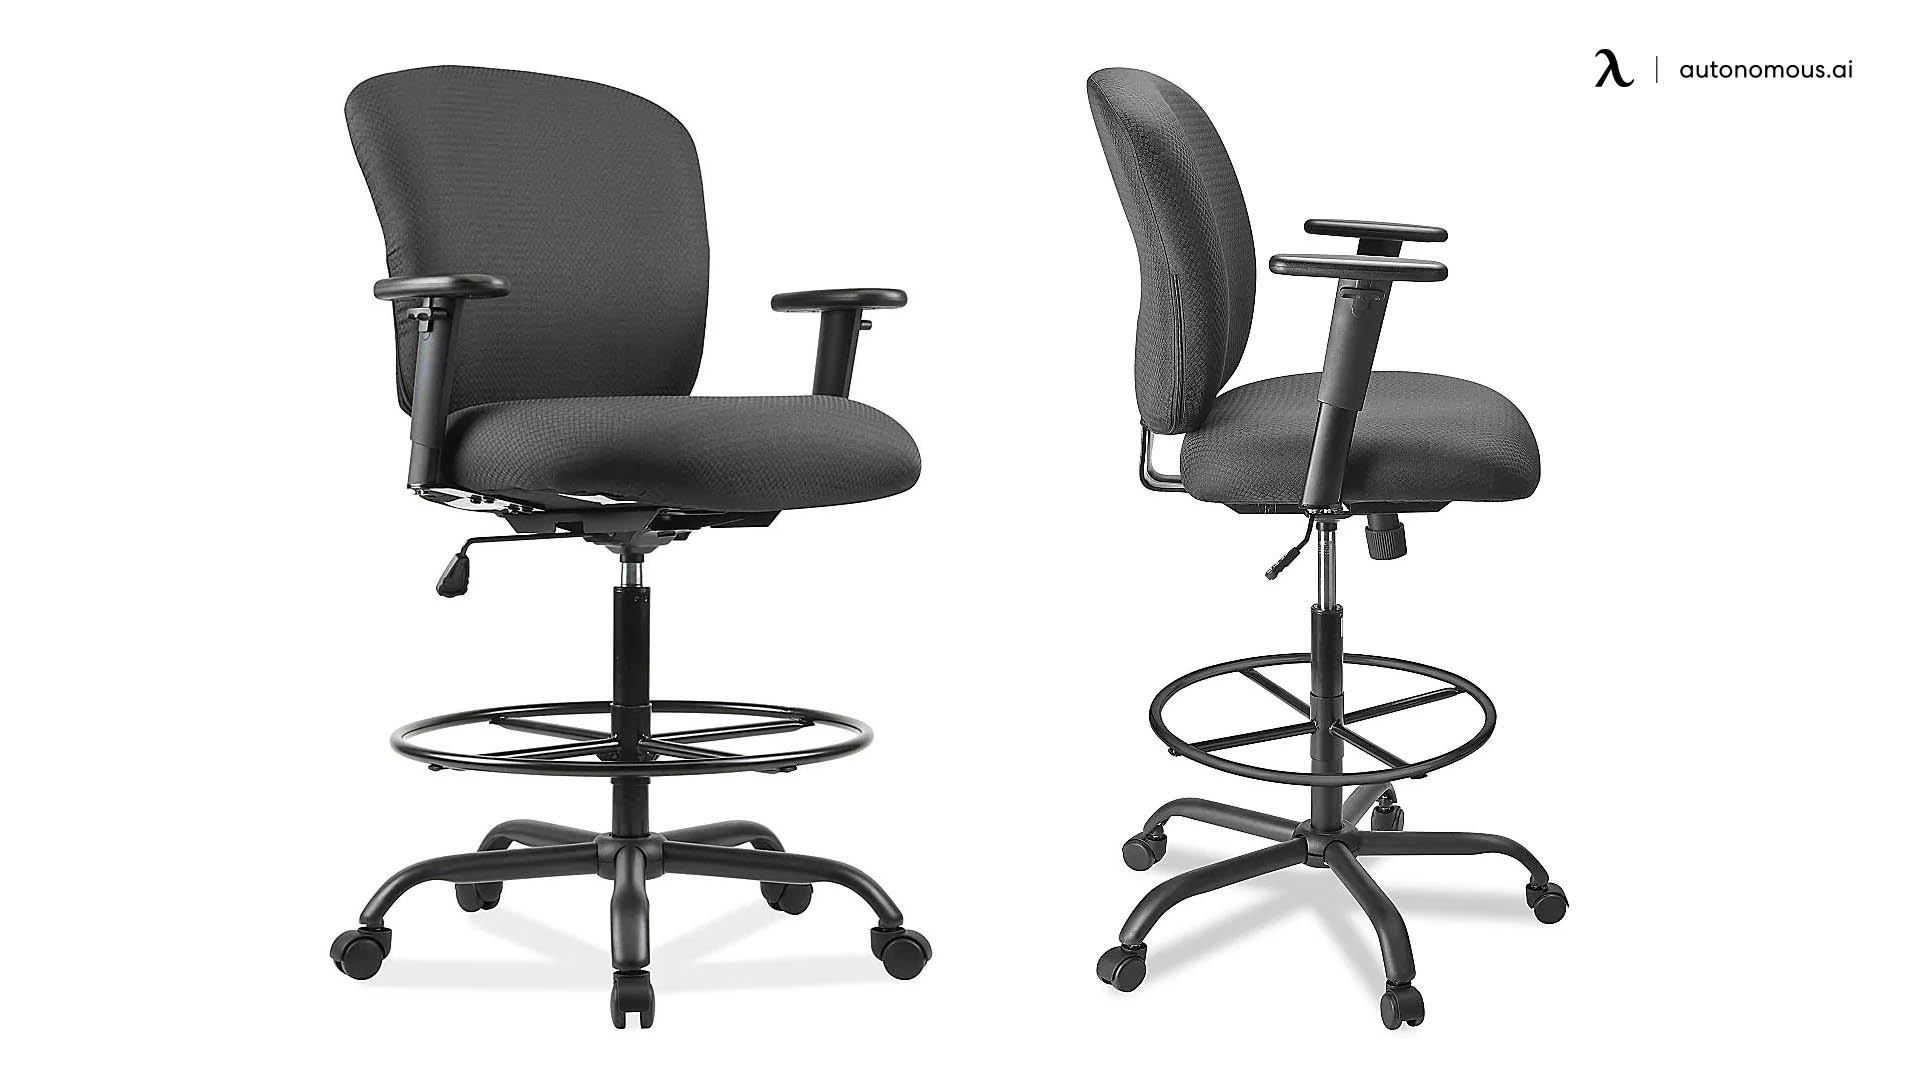 12 Best Active Sitting Chairs to Improve Your Posture & Health